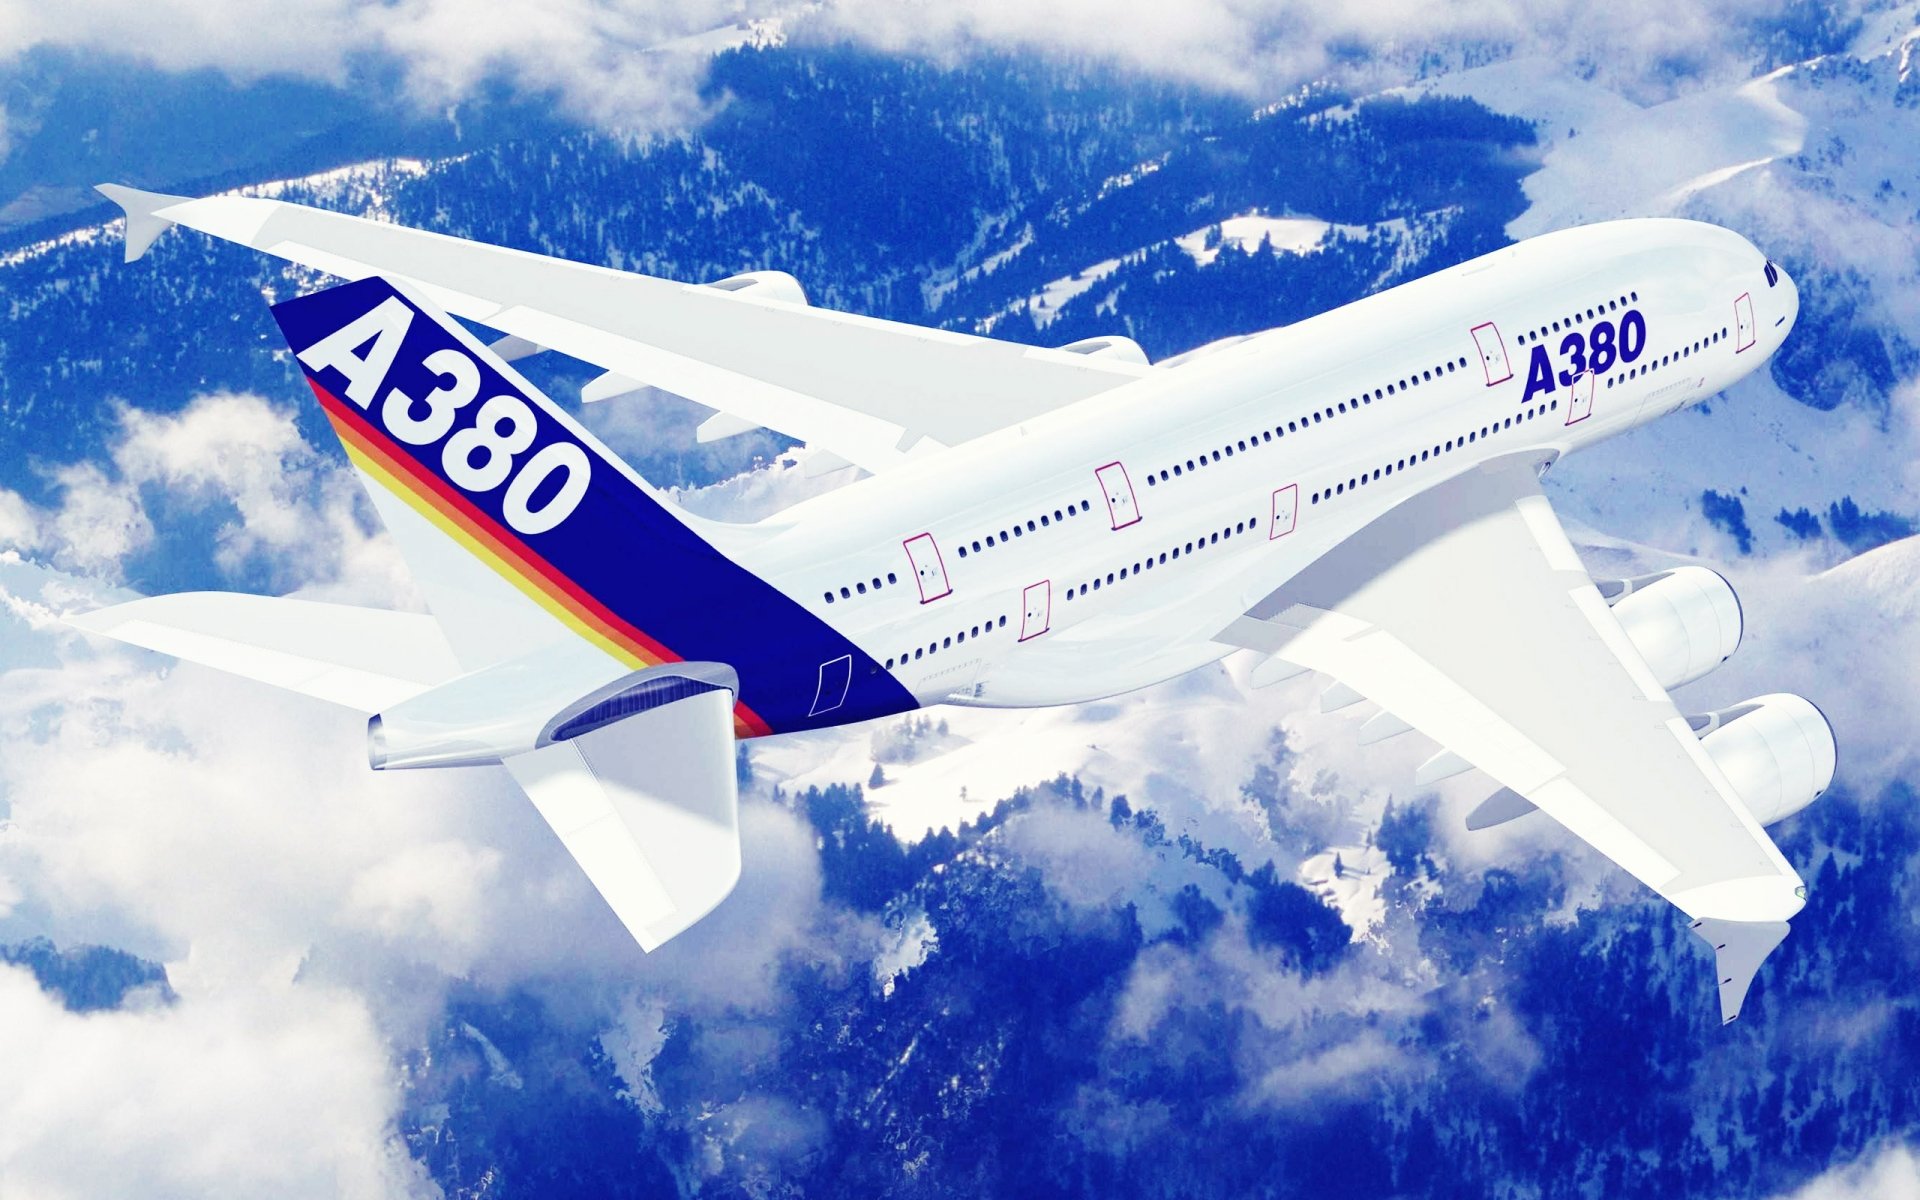 a380, Aicrafts, Airbus, Airports, Jet, Sky, Transports Wallpaper